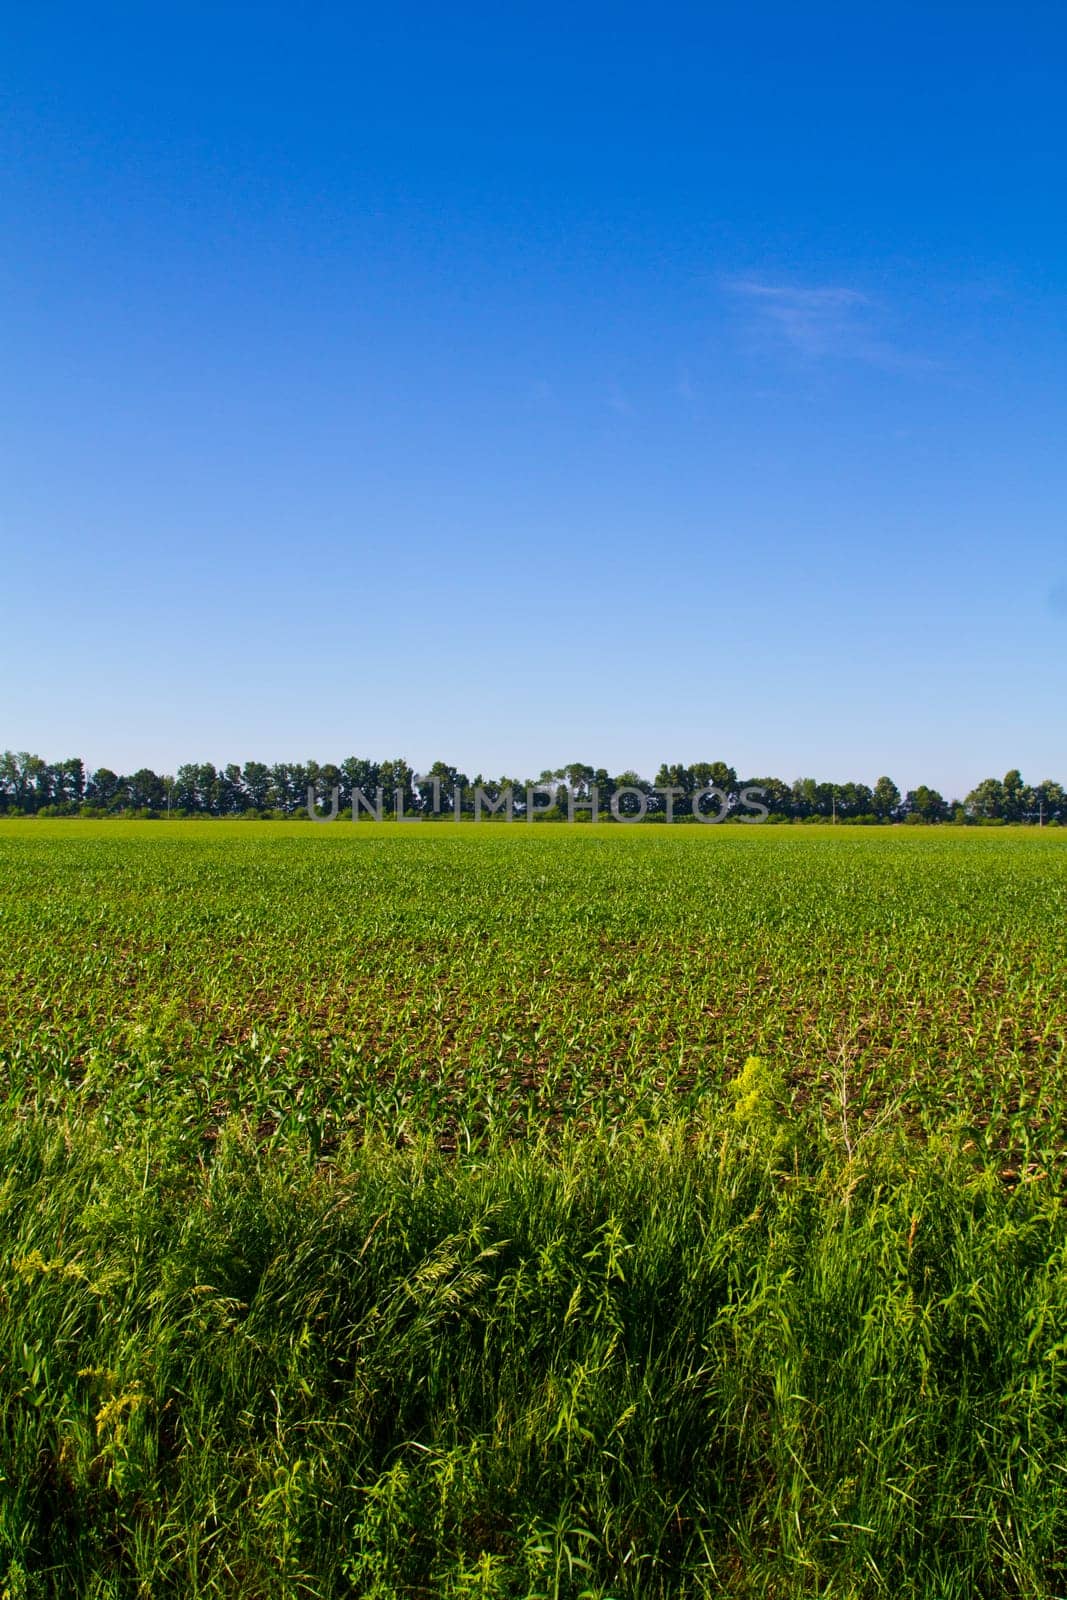 Idyllic rural farmland in Fort Wayne, Indiana, showcasing lush crops under a clear blue sky. A vibrant mix of green and brown hues suggests various crop varieties or growth stages. This captivating image captures the essence of the United States agriculture.